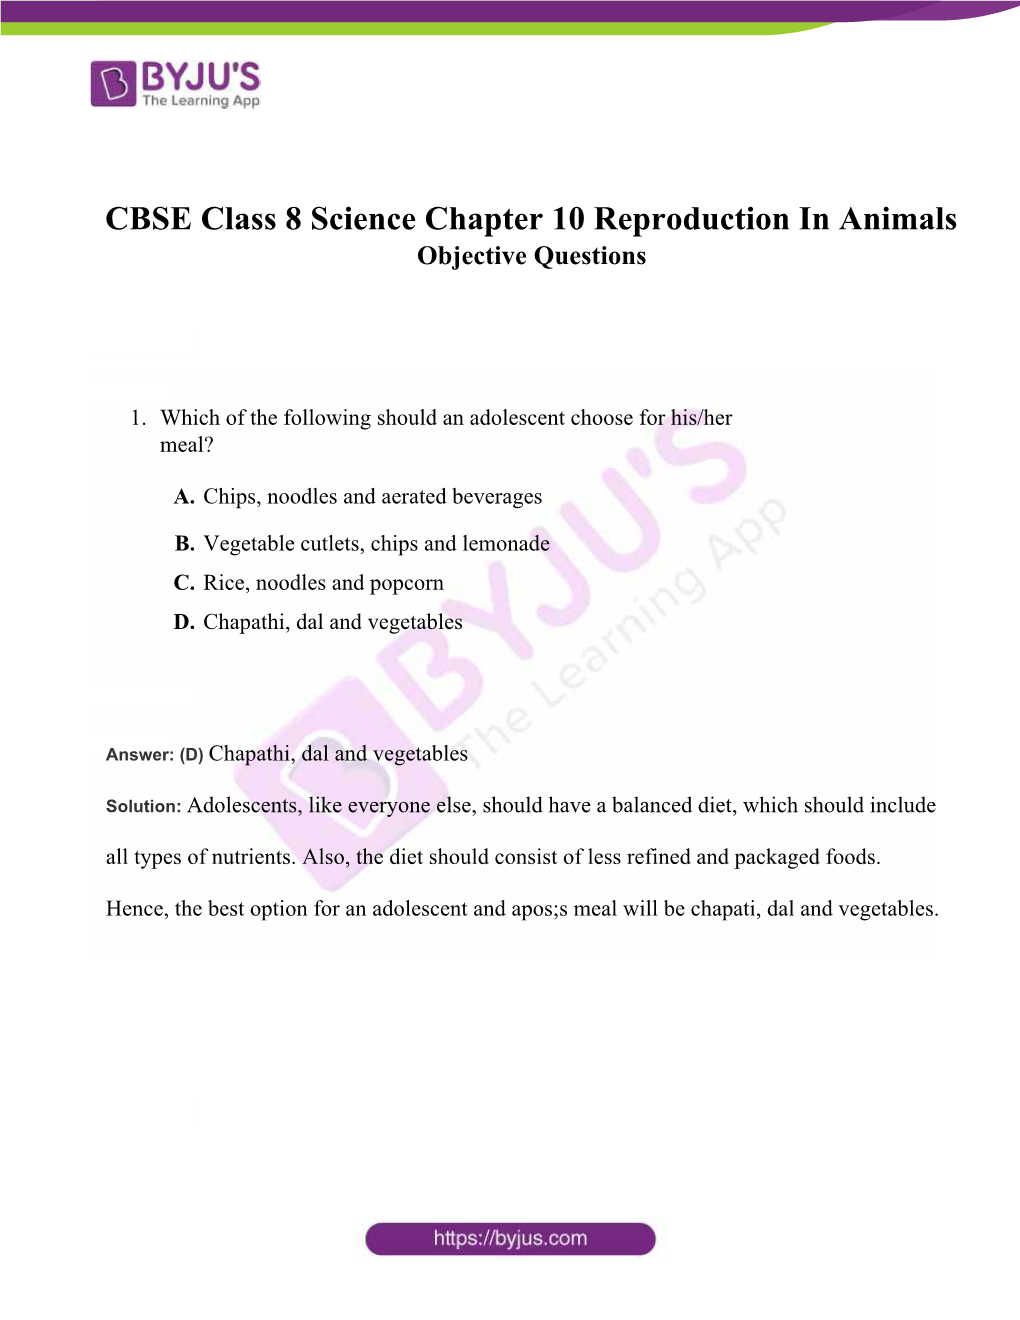 CBSE Class 8 Science Chapter 10 Reaching the Age of Adolescence